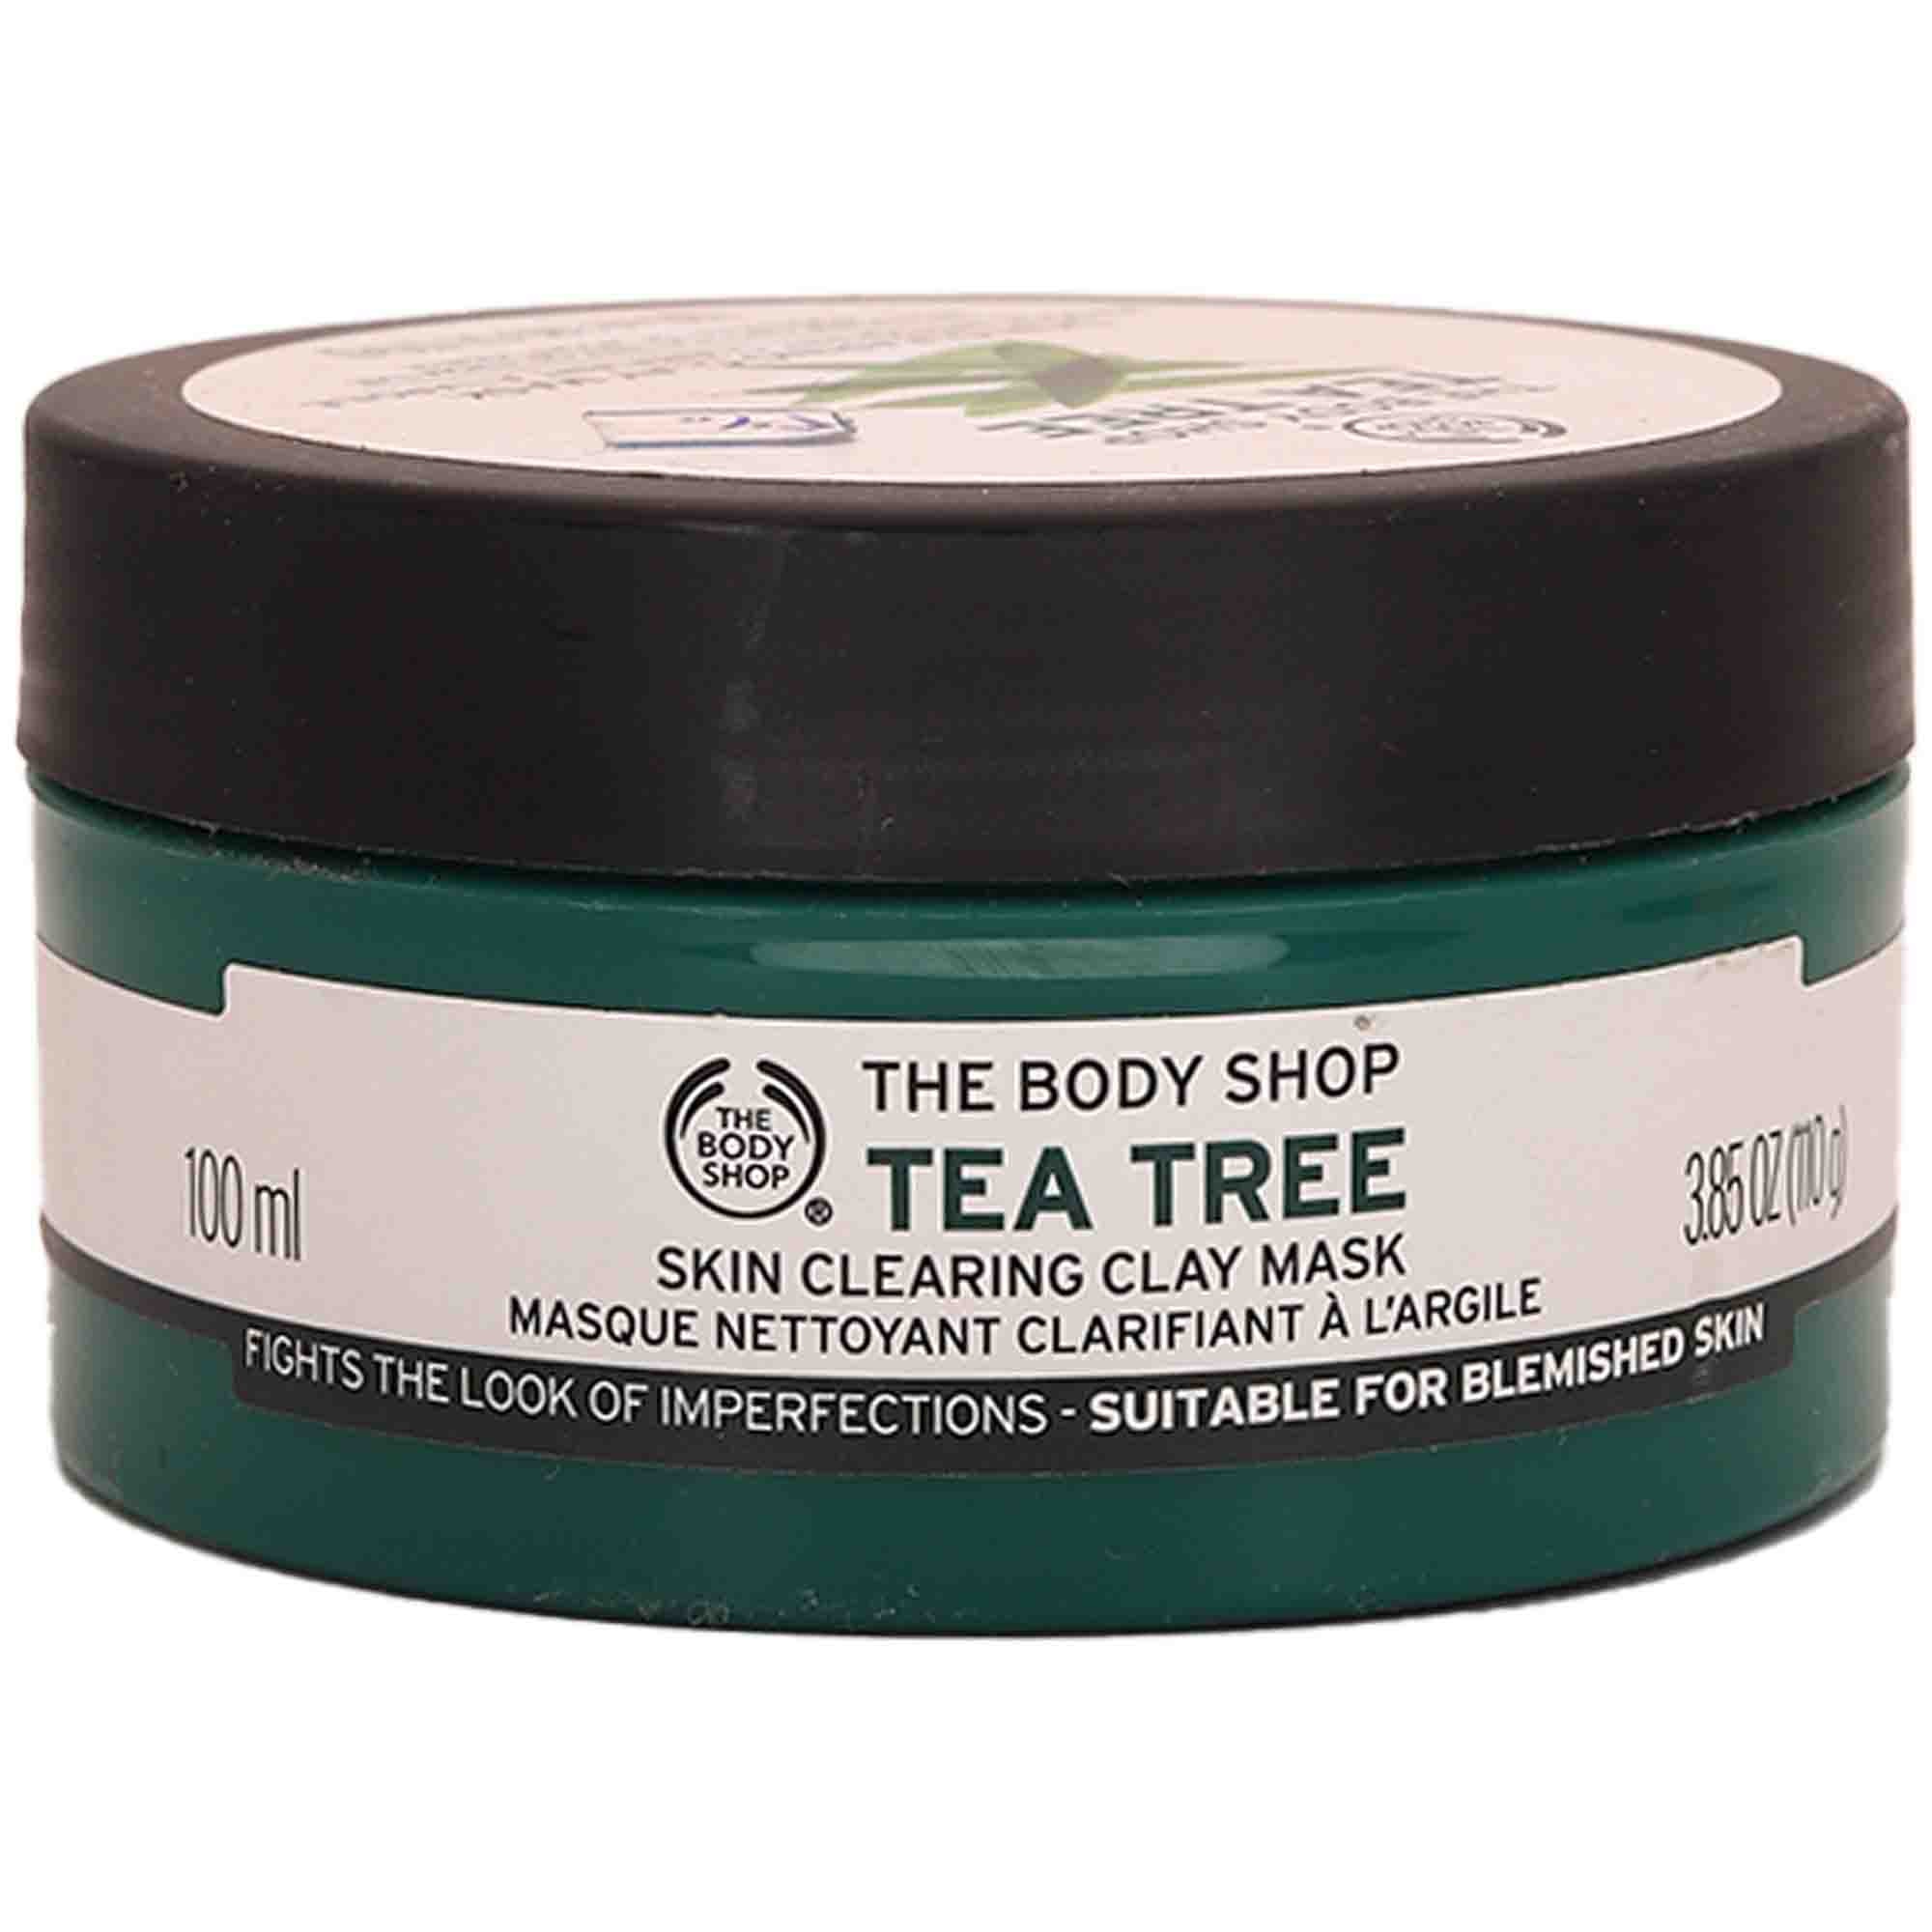 100mm clay mask - The Body Shop